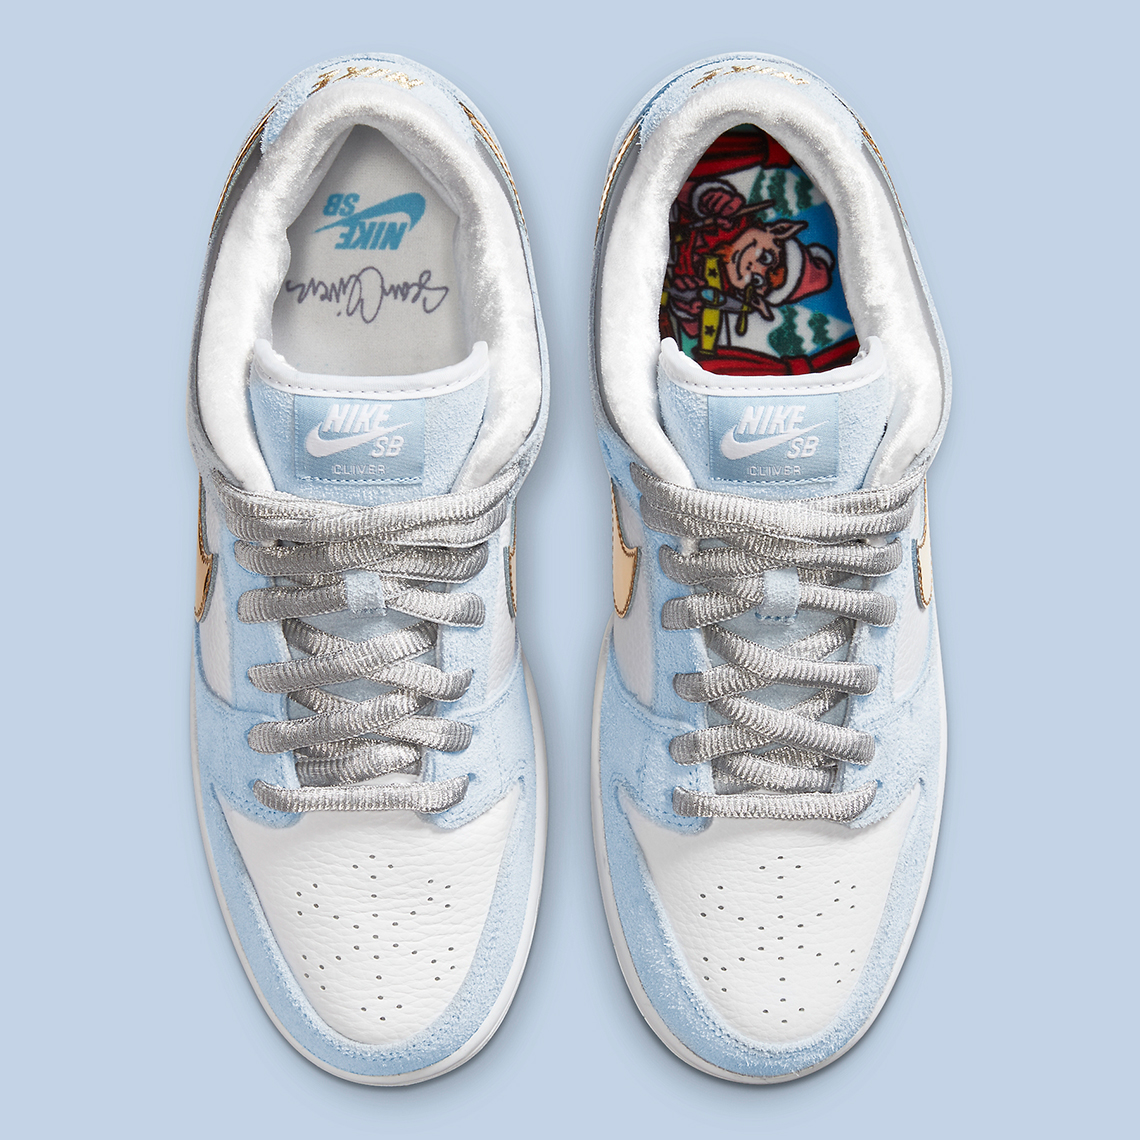 Sean Cliver Nike Sb Dunk Low Official Images Dc9936 100 8